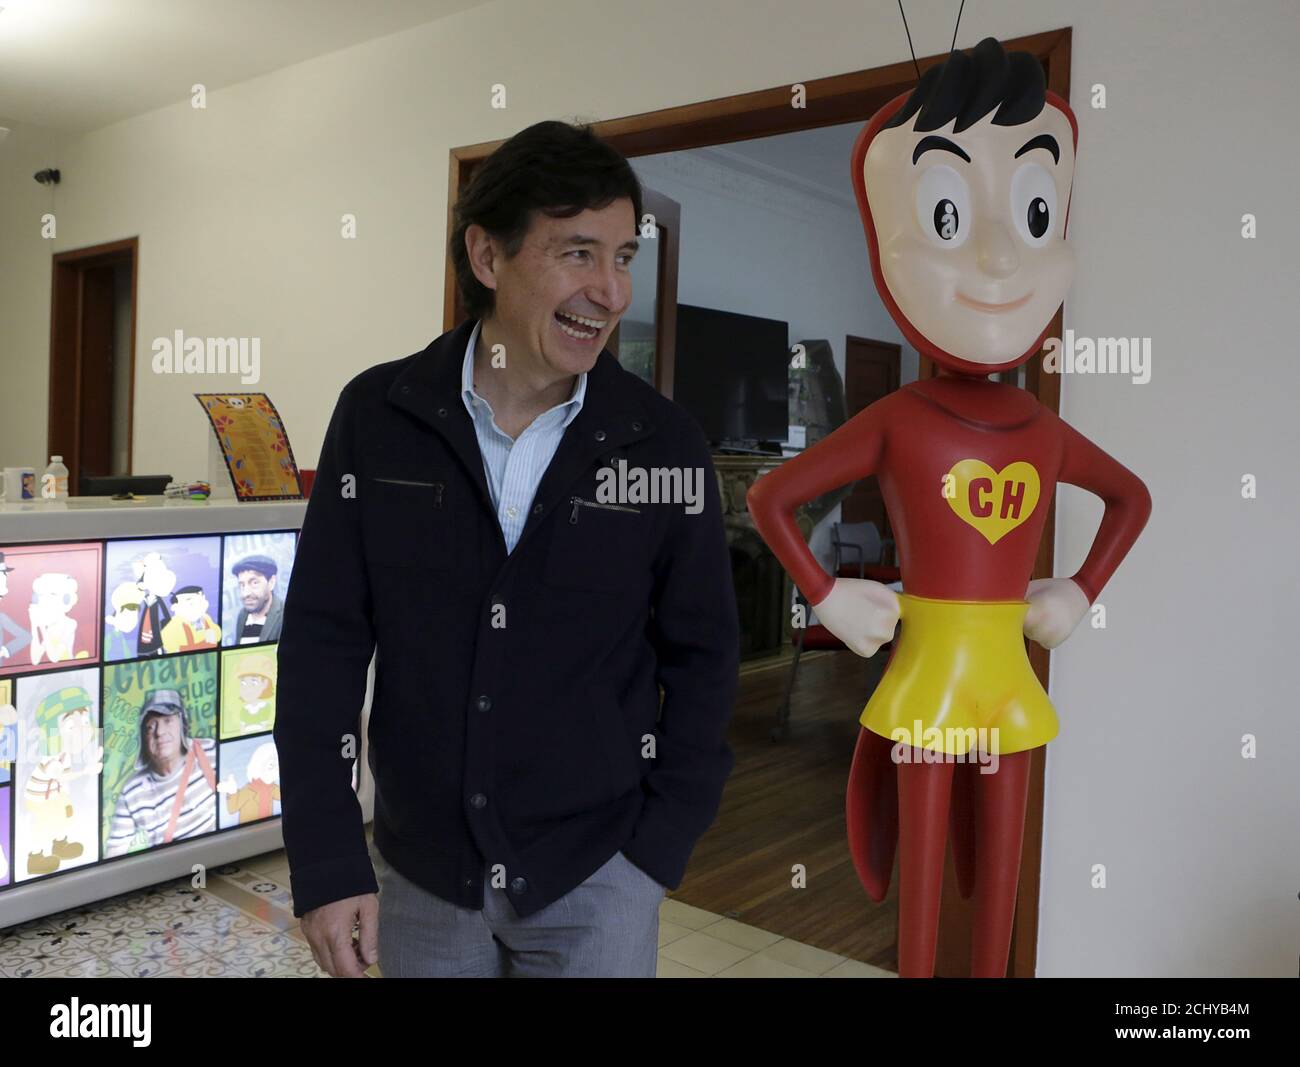 The Son Of El Chavo Creator Roberto Gomez Bolanos Walks In Front Of A Life Sized Figurine Of El Chavo Inside Of Home Of El Chavo Del Ocho In Mexico City Mexico November